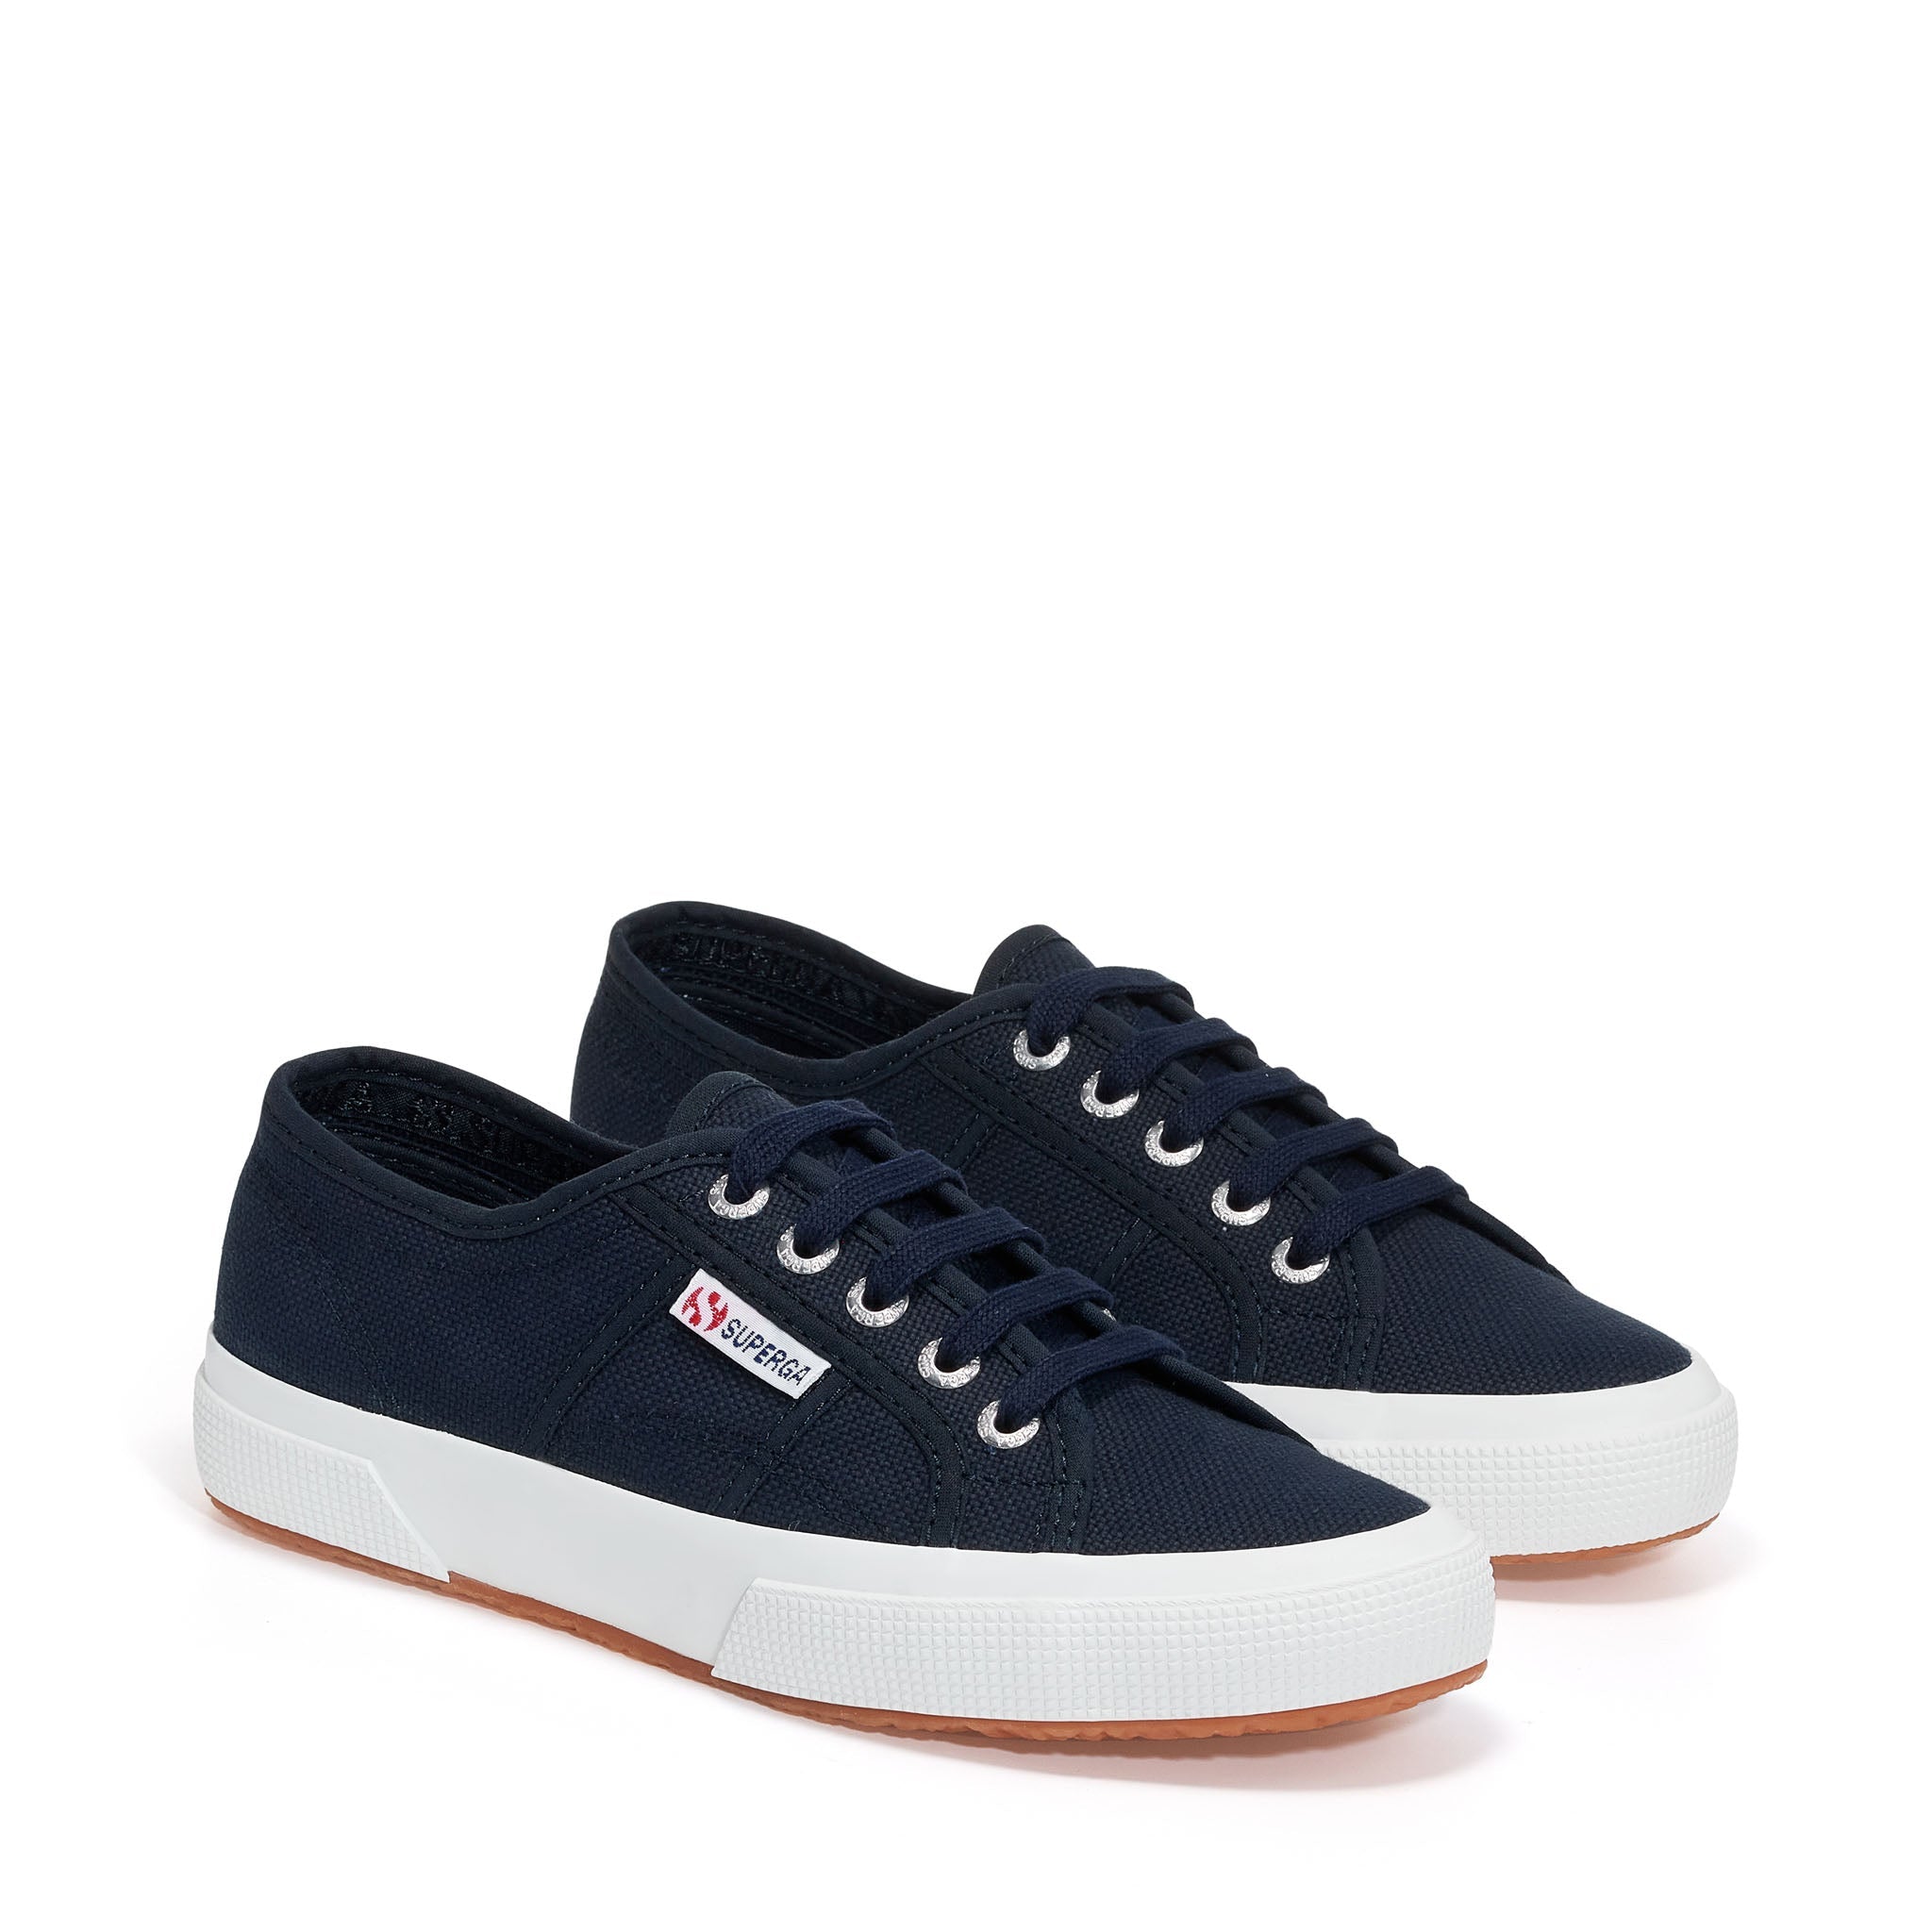 Superga 2750 Cotu Classic Sneakers - Navy White. Front view.